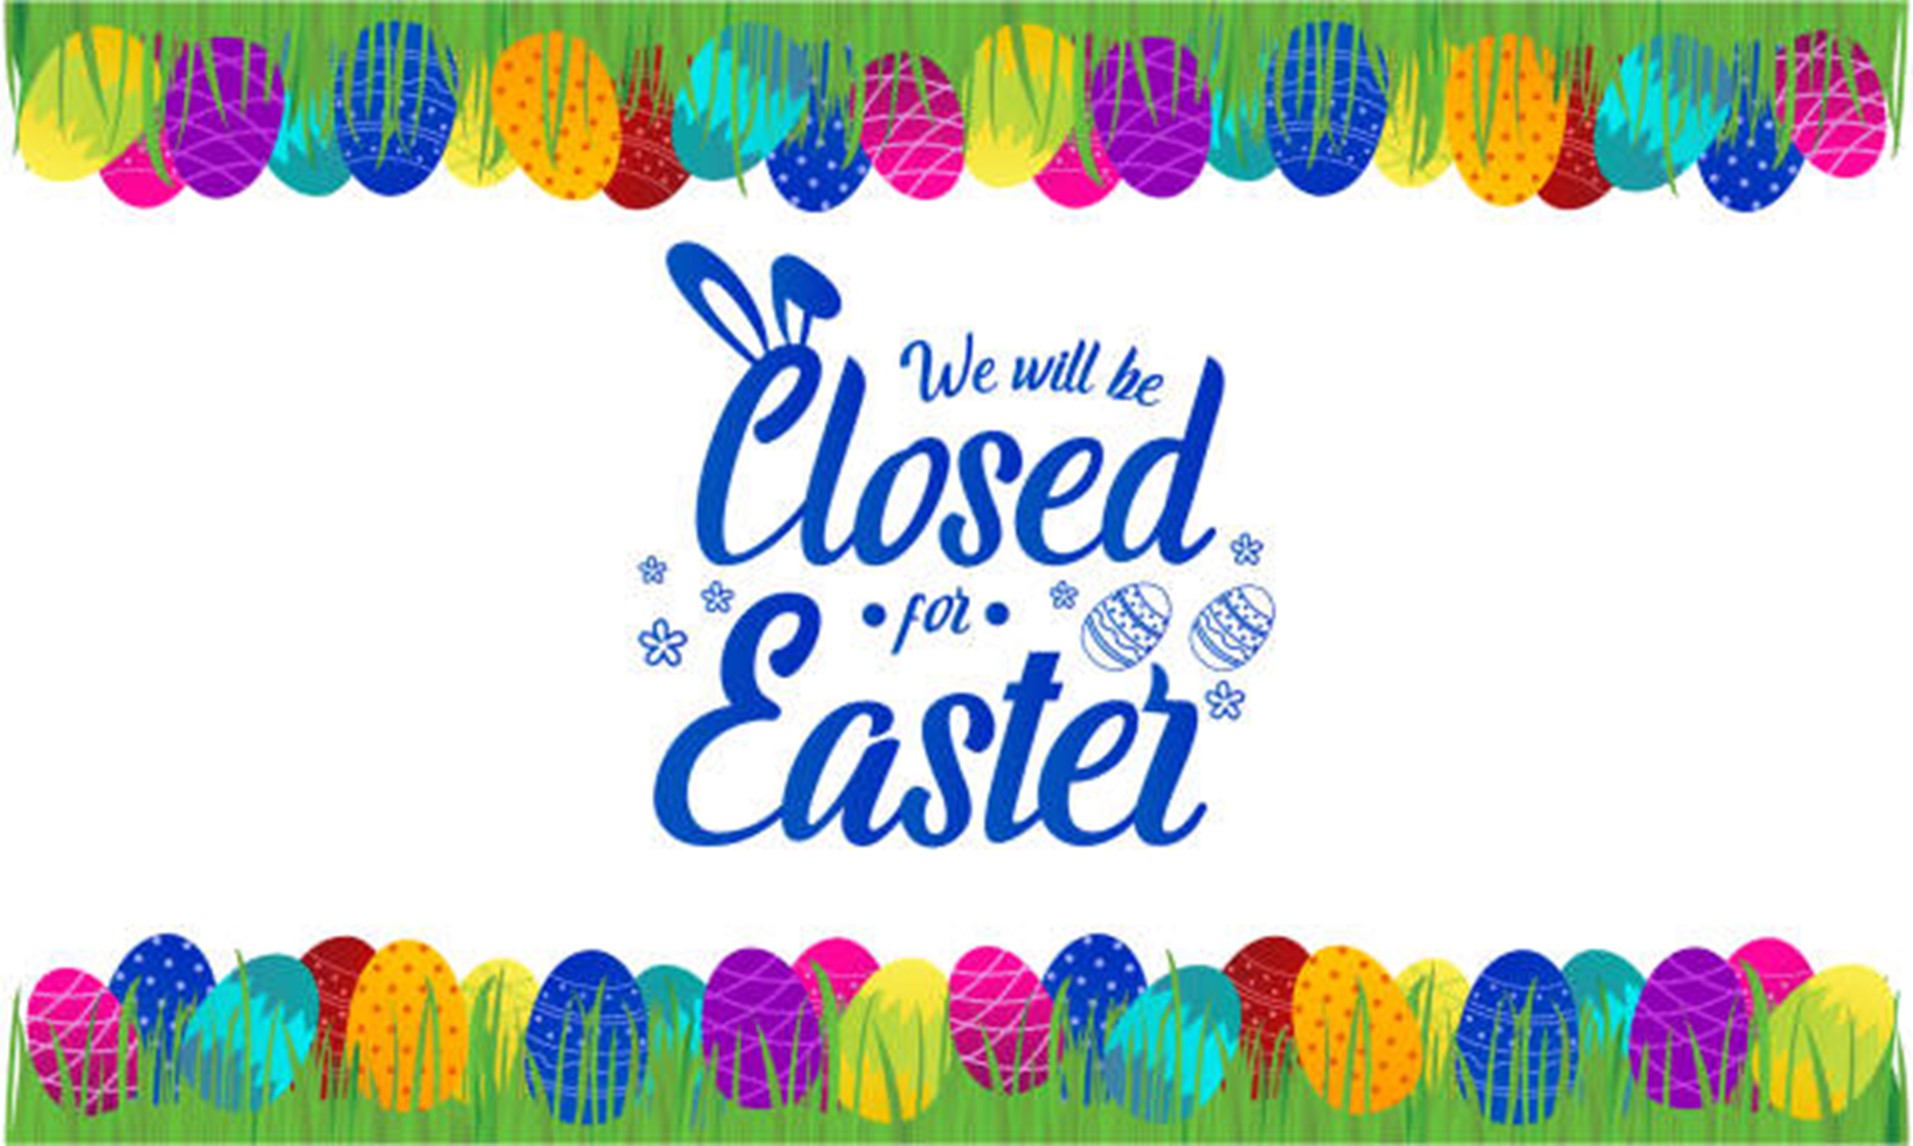 We will be Closed for Easter - words with clipart background of colored eggs in grass